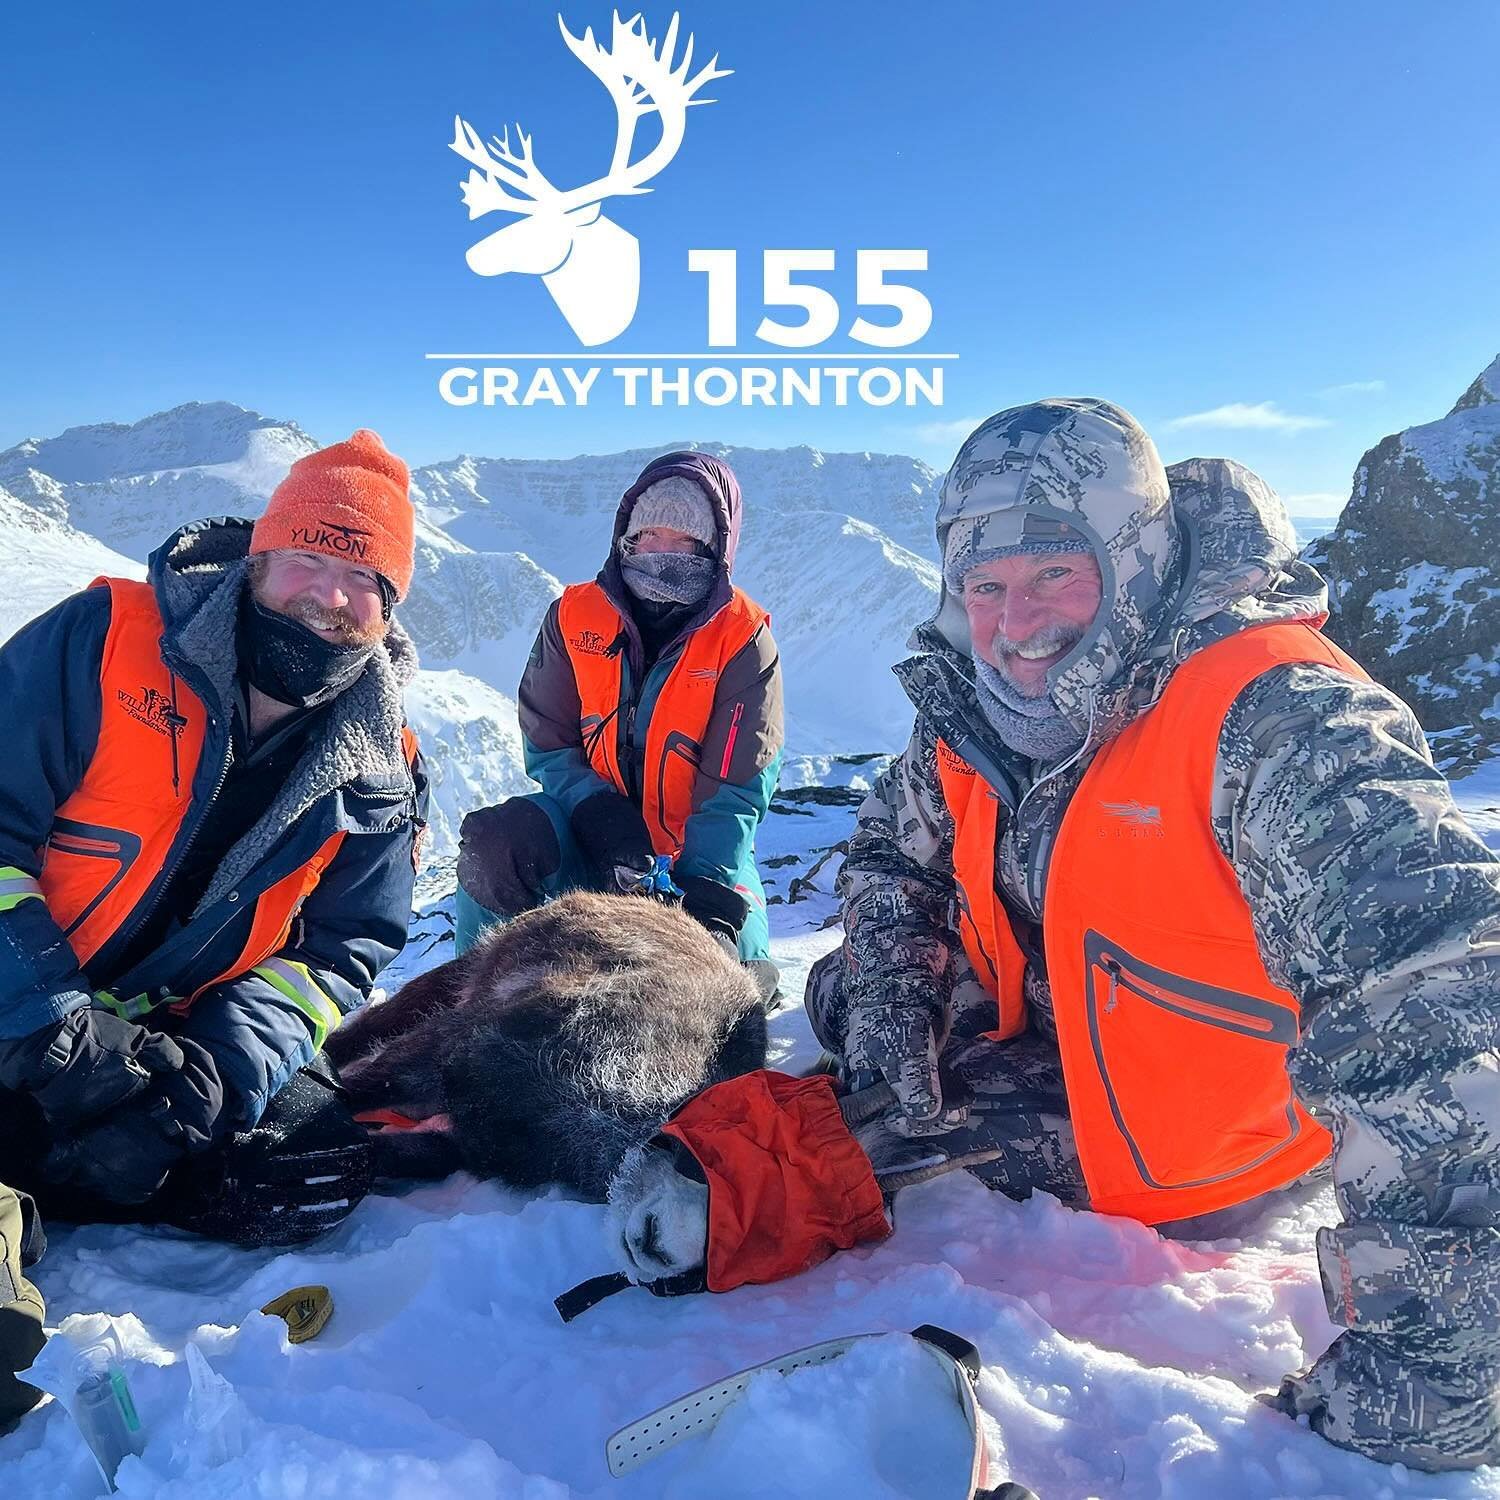 Can inclusion of the non-hunting community influence AI? Apparently it can! In case you missed it, Mike had a great chat with @wildsheepfoundation President and CEO @graynthornton a few weeks back and they covered all kinds of topics including AI, fi